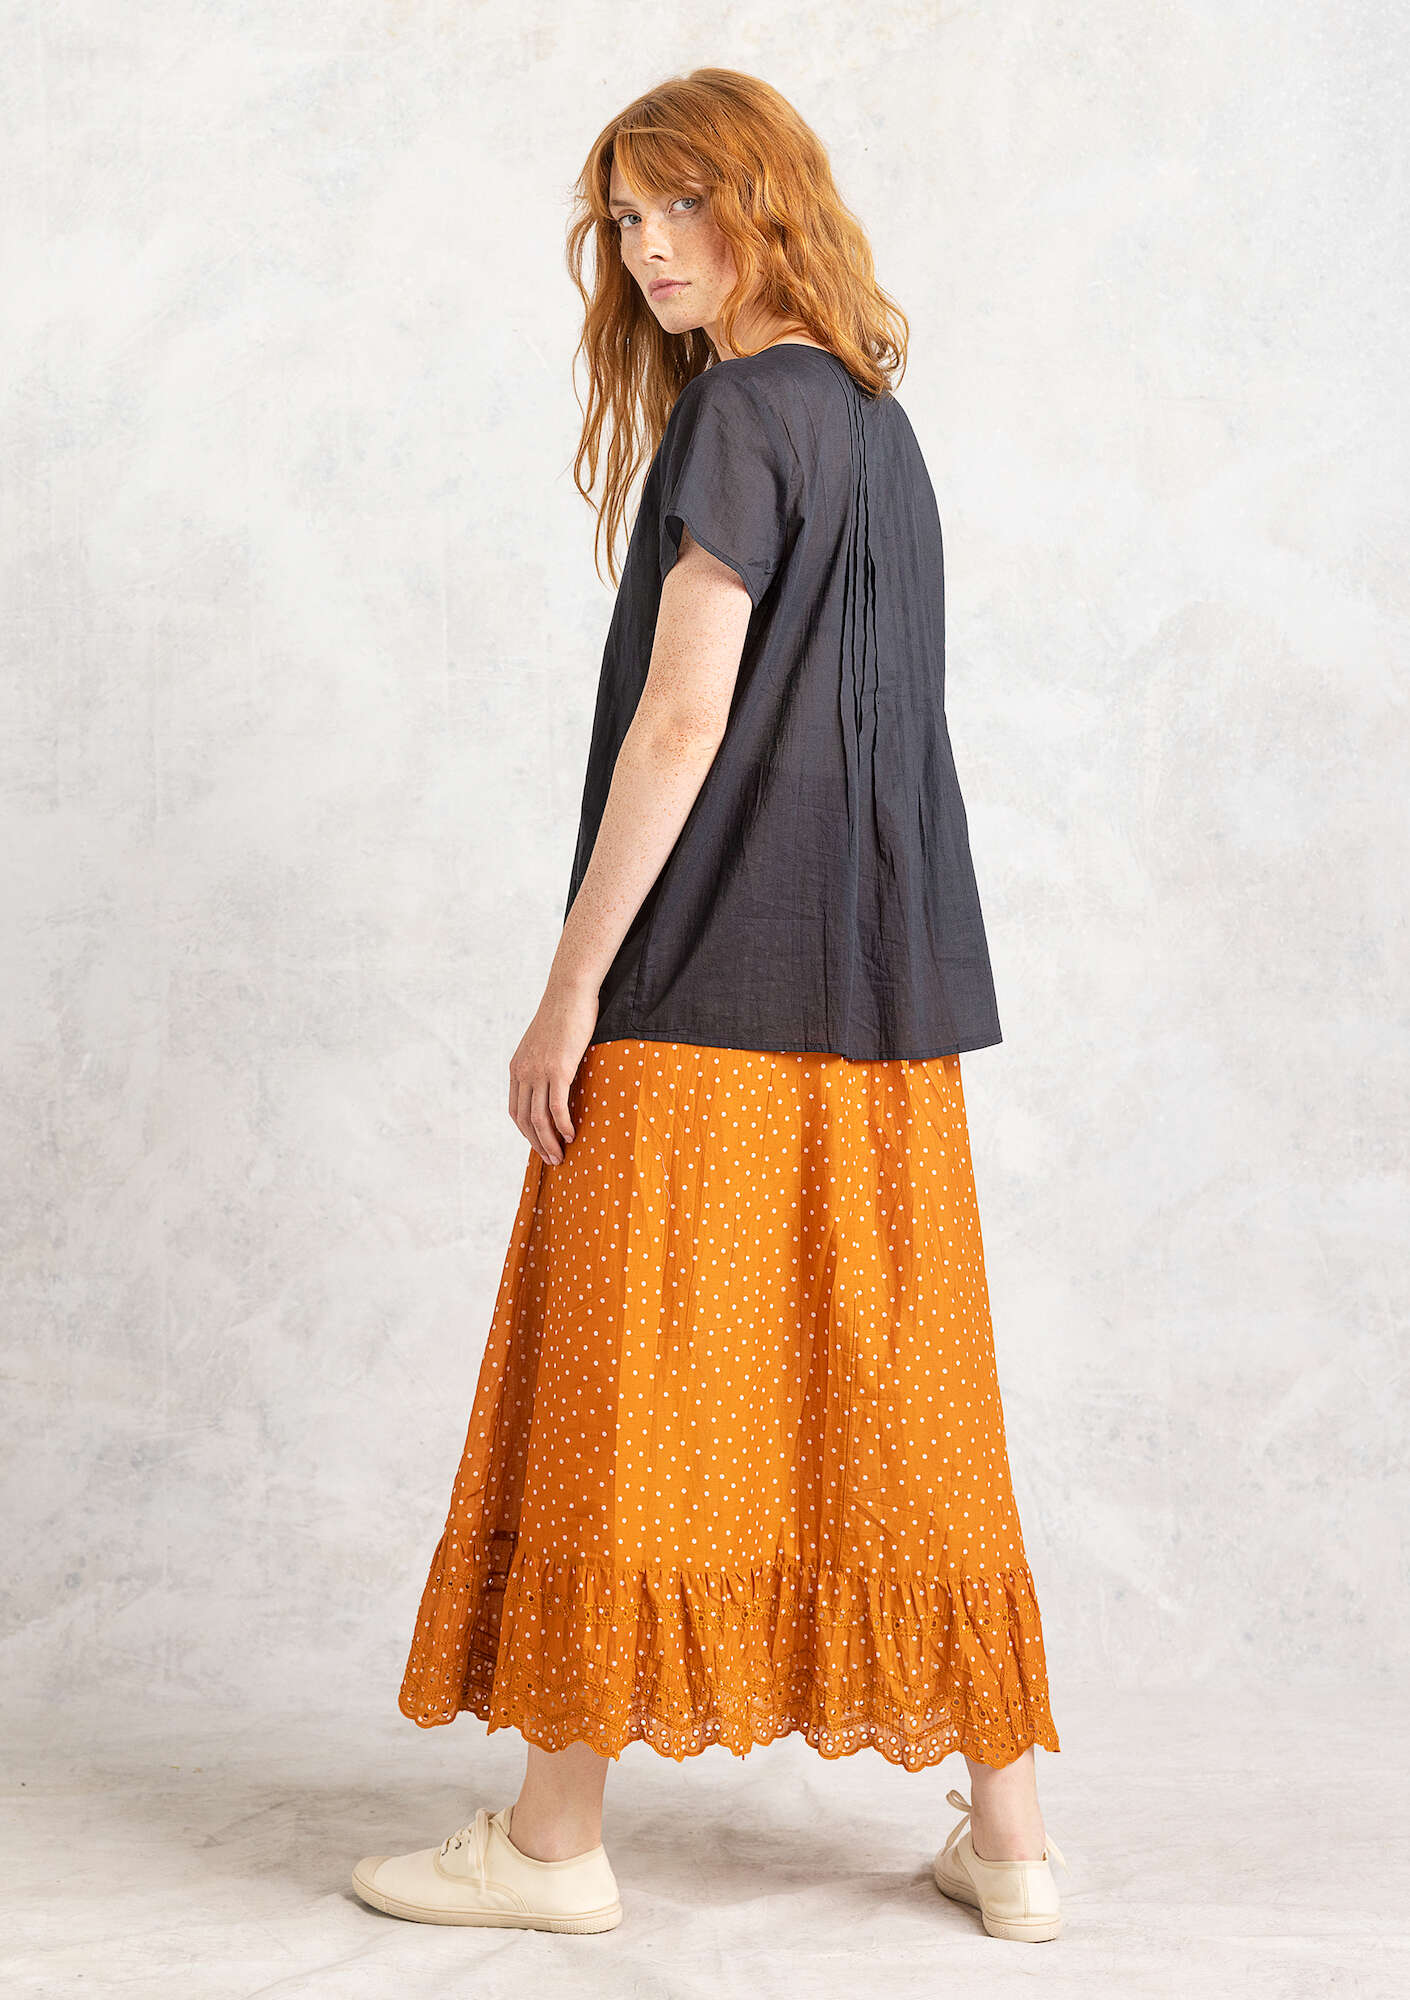 “Pytte” slip in woven organic cotton amber/patterned